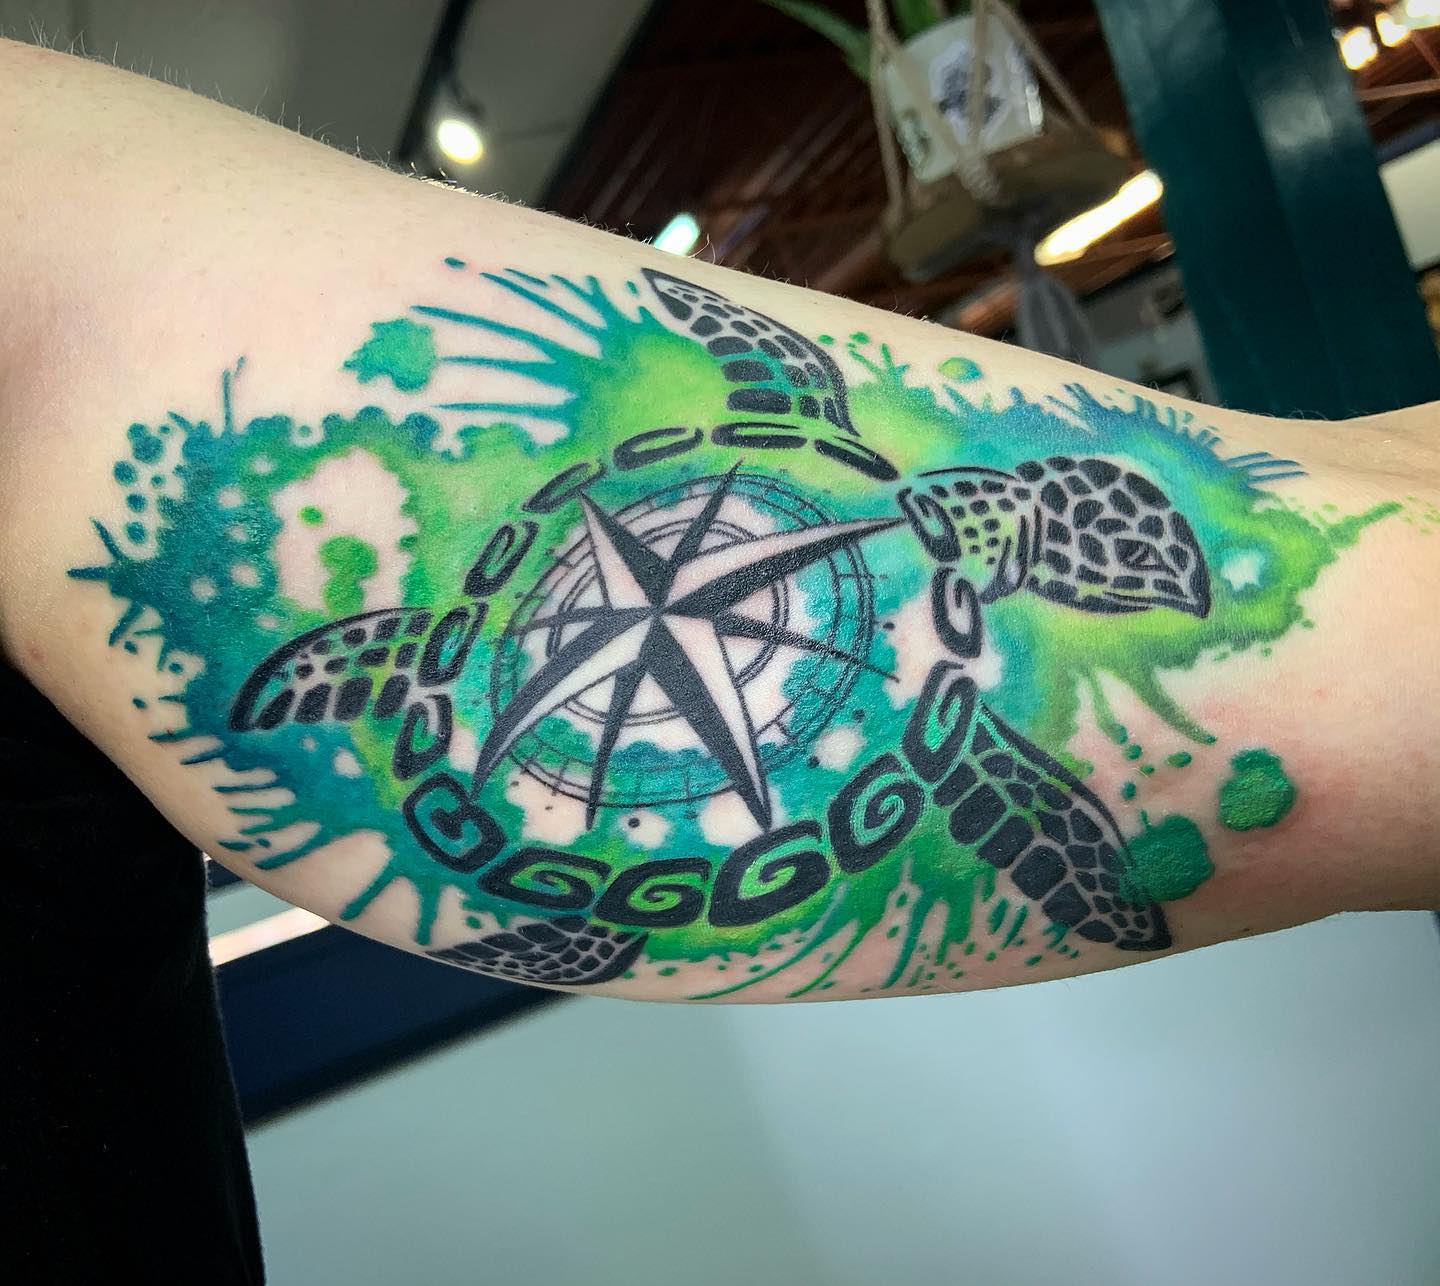 I love the sea turtle with the compass! It's such a great representation of an ideal way to navigate life—taking the time to stop and orient yourself with your surroundings, then staying focused on the direction you want to go in. Plus, watercolor splash makes it stand out more.